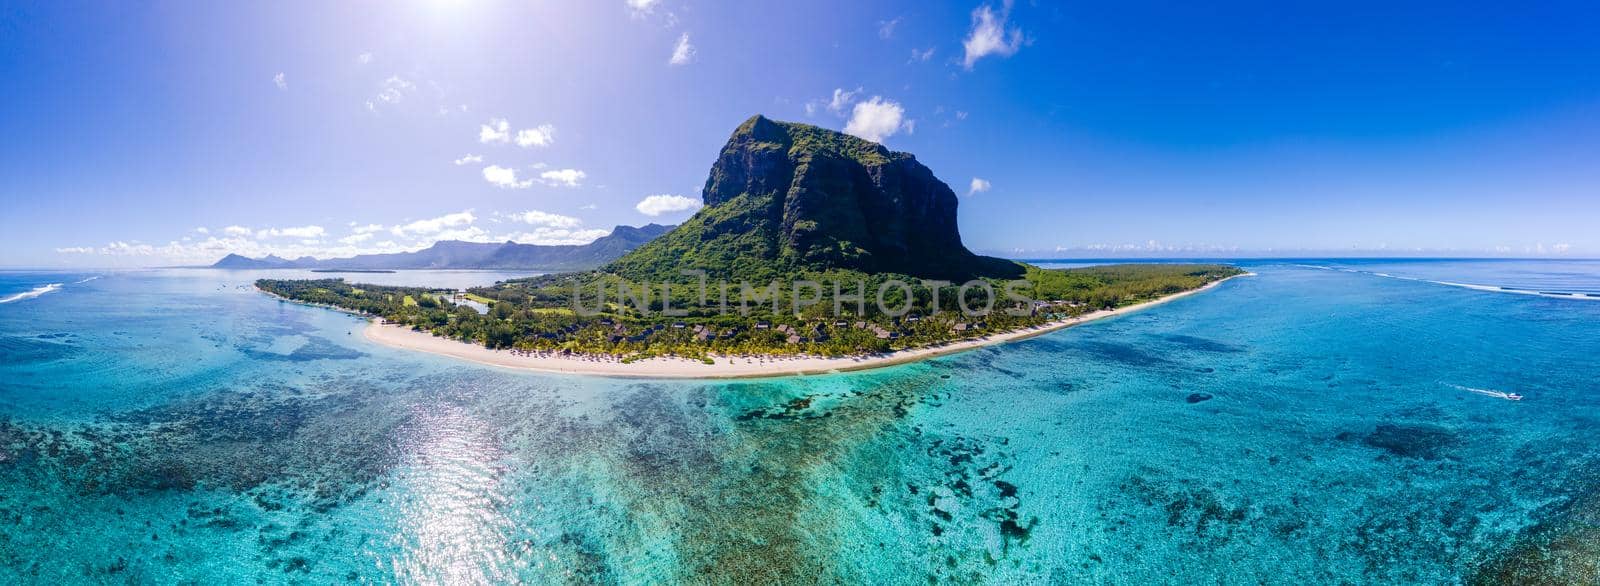 Le Morne beach Mauritius,Tropical beach with palm trees and white sand blue ocean and beach beds with umbrella,Sun chairs and parasol under a palm tree at a tropical beac, Le Morne beach Mauritius by fokkebok